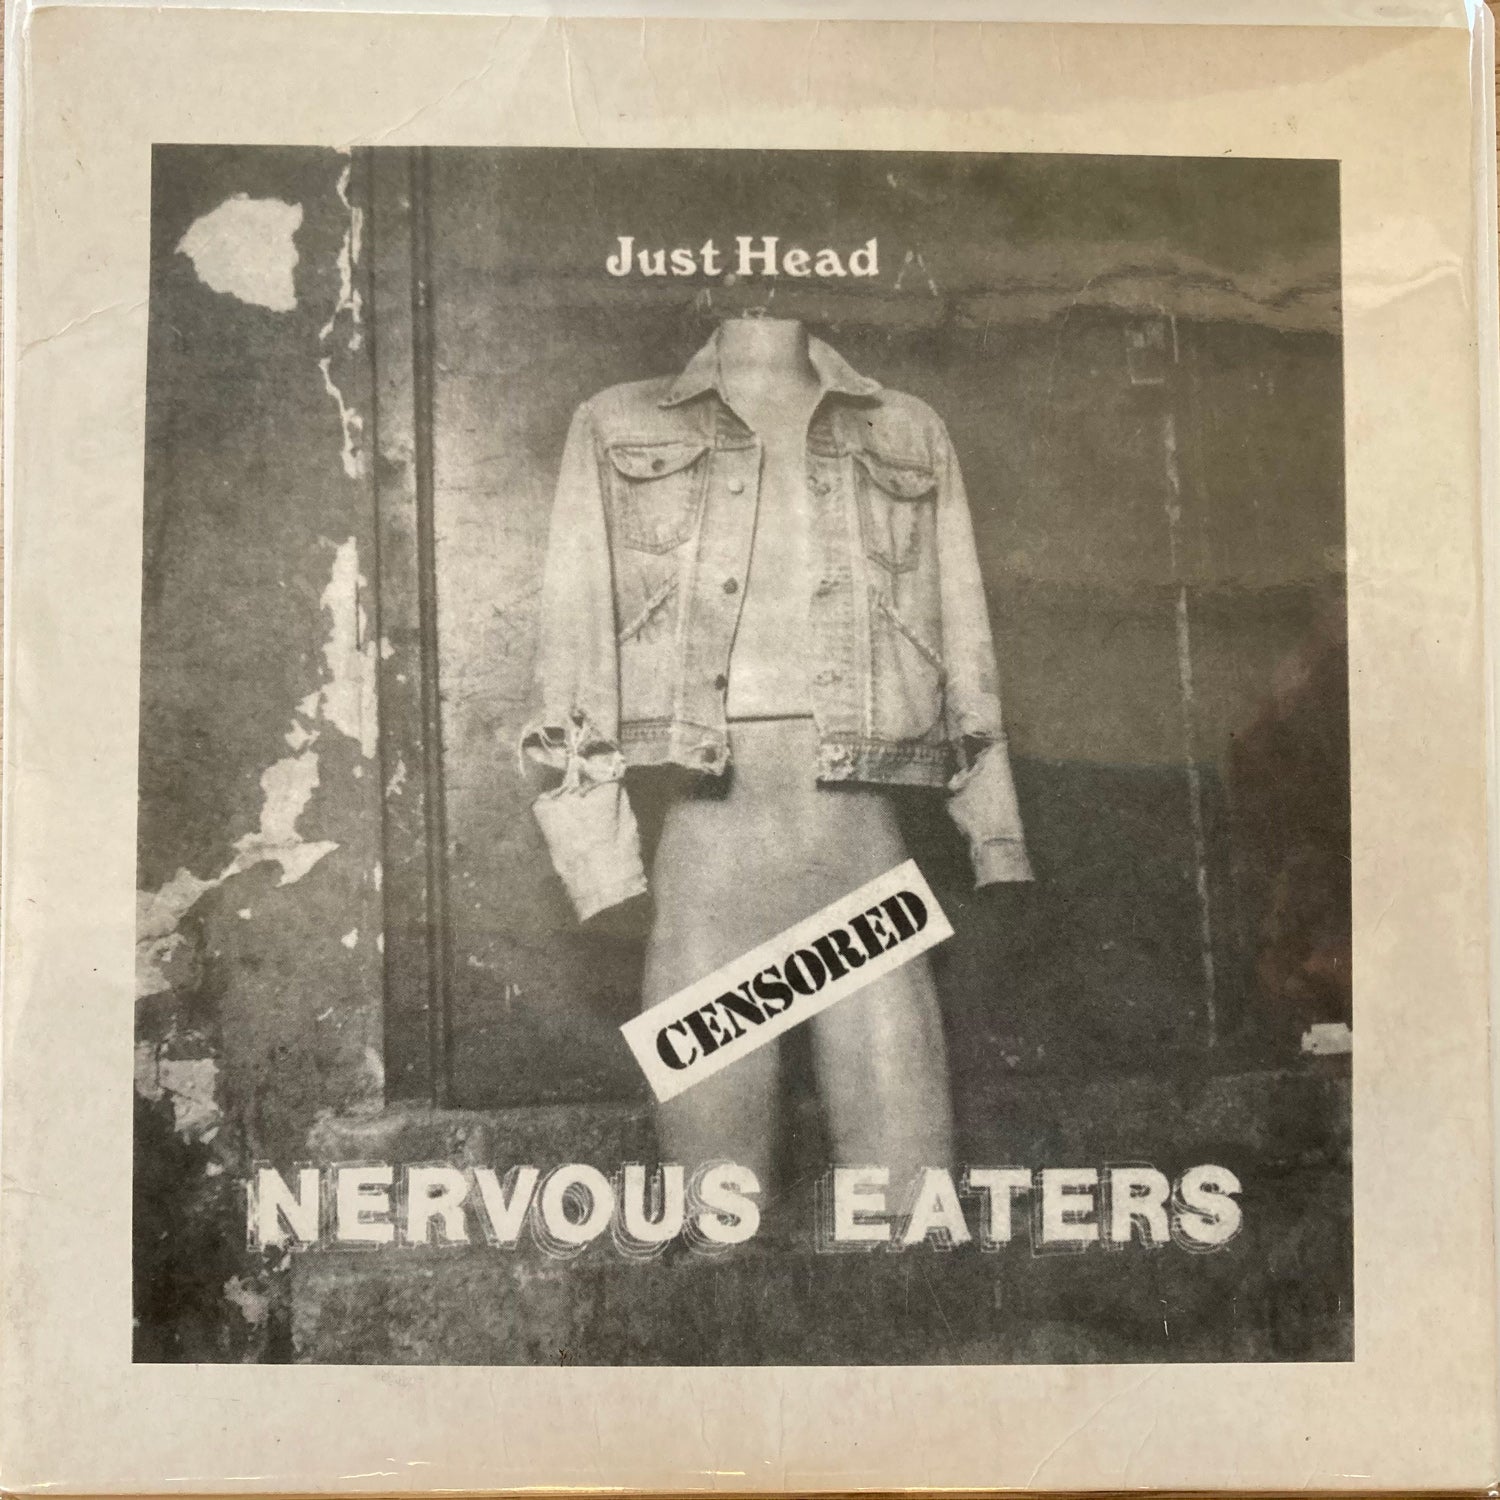 Just Head - Nervous Eaters (7")